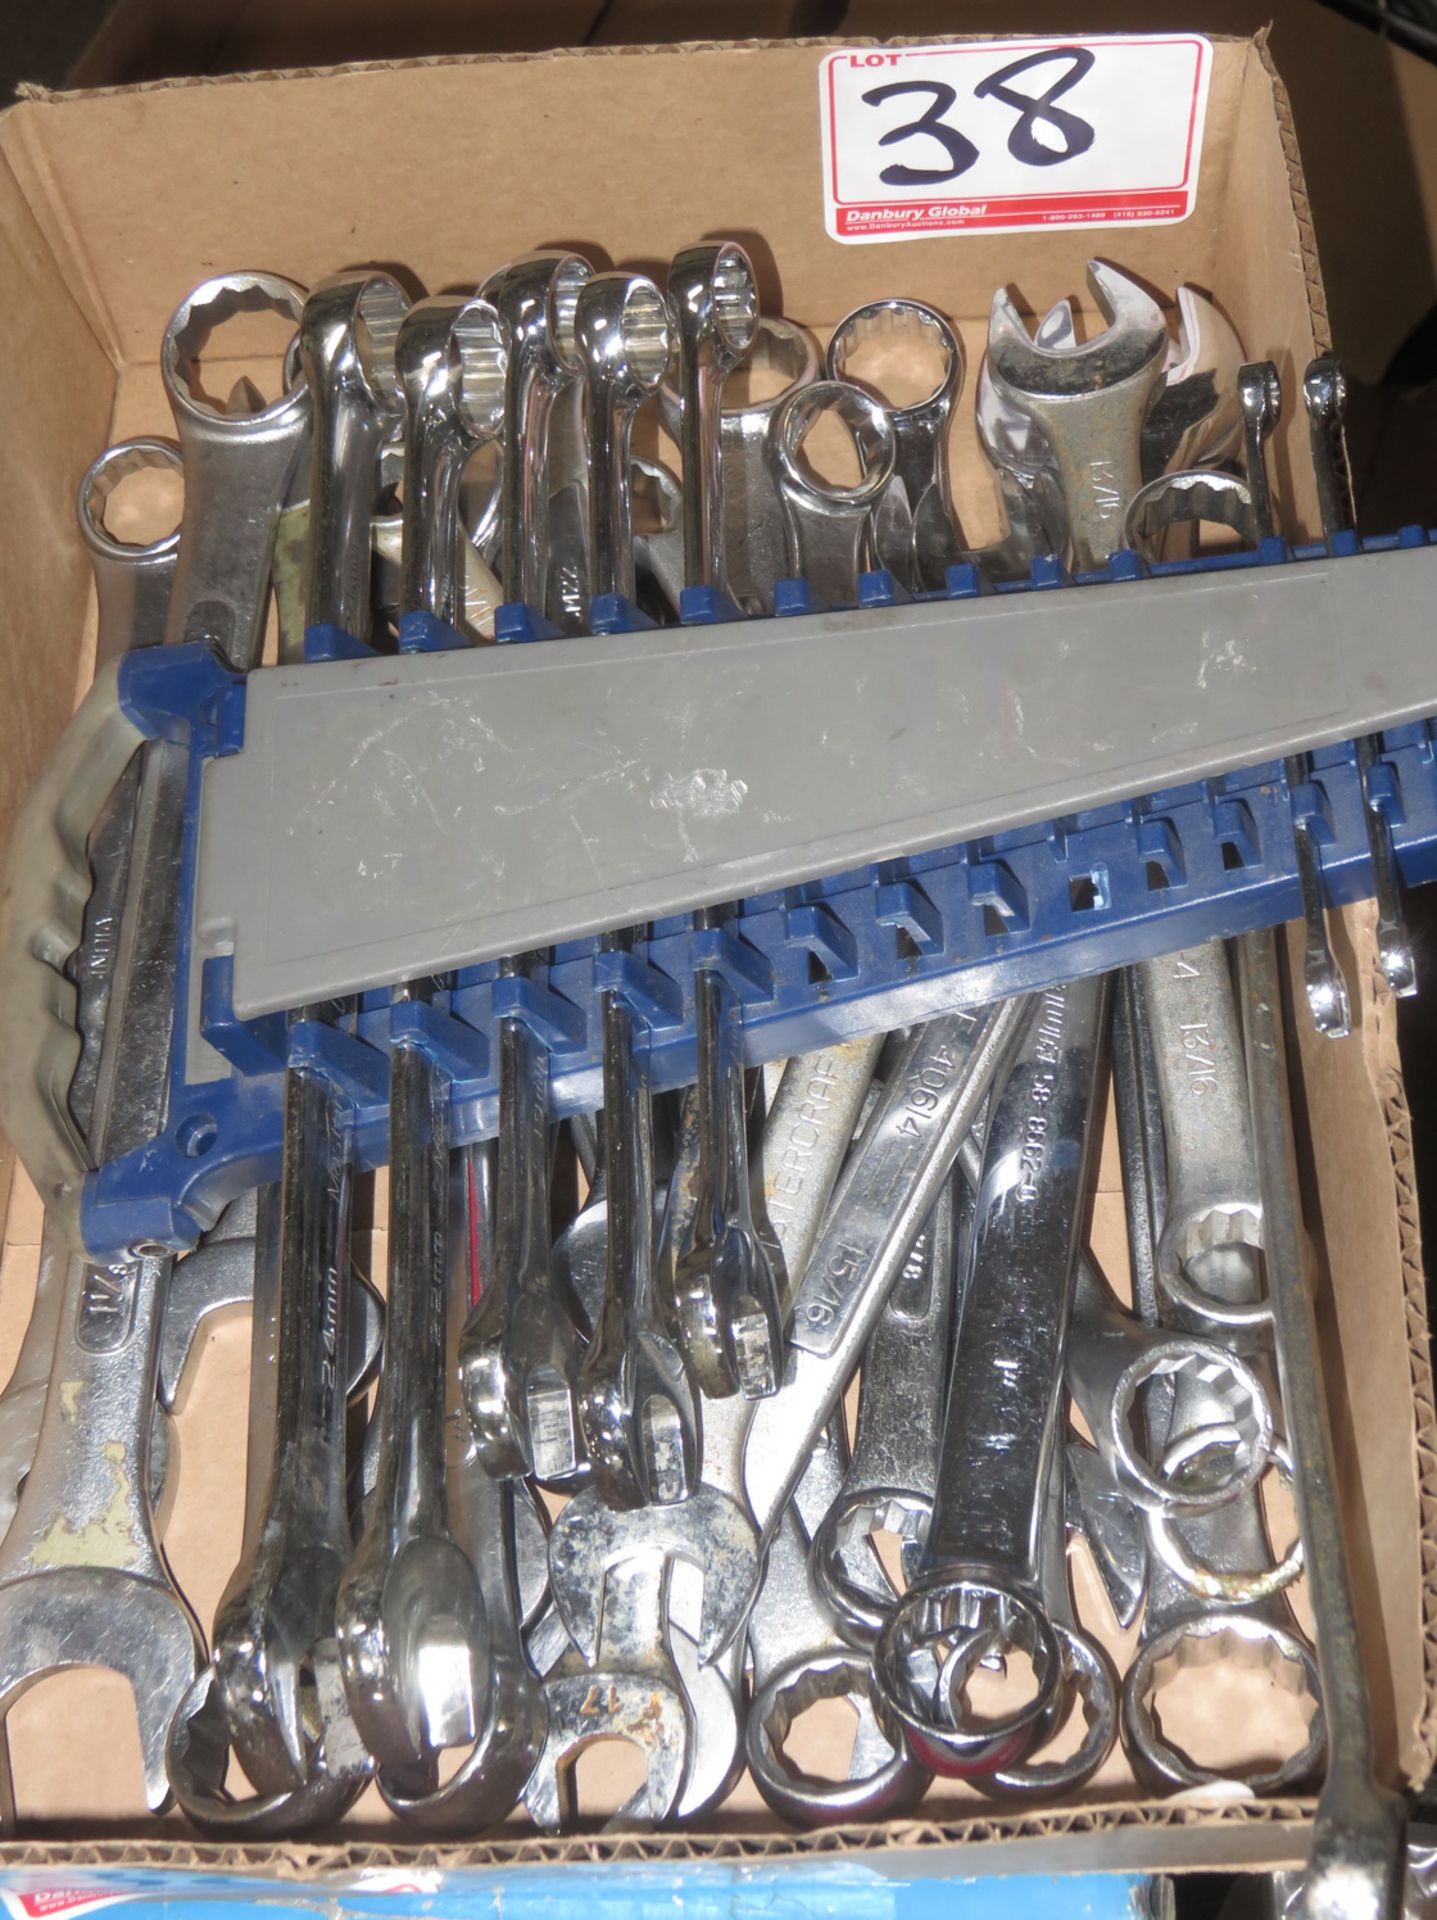 LOT - UNIVERSAL H/D COMBINATION WRENCHES